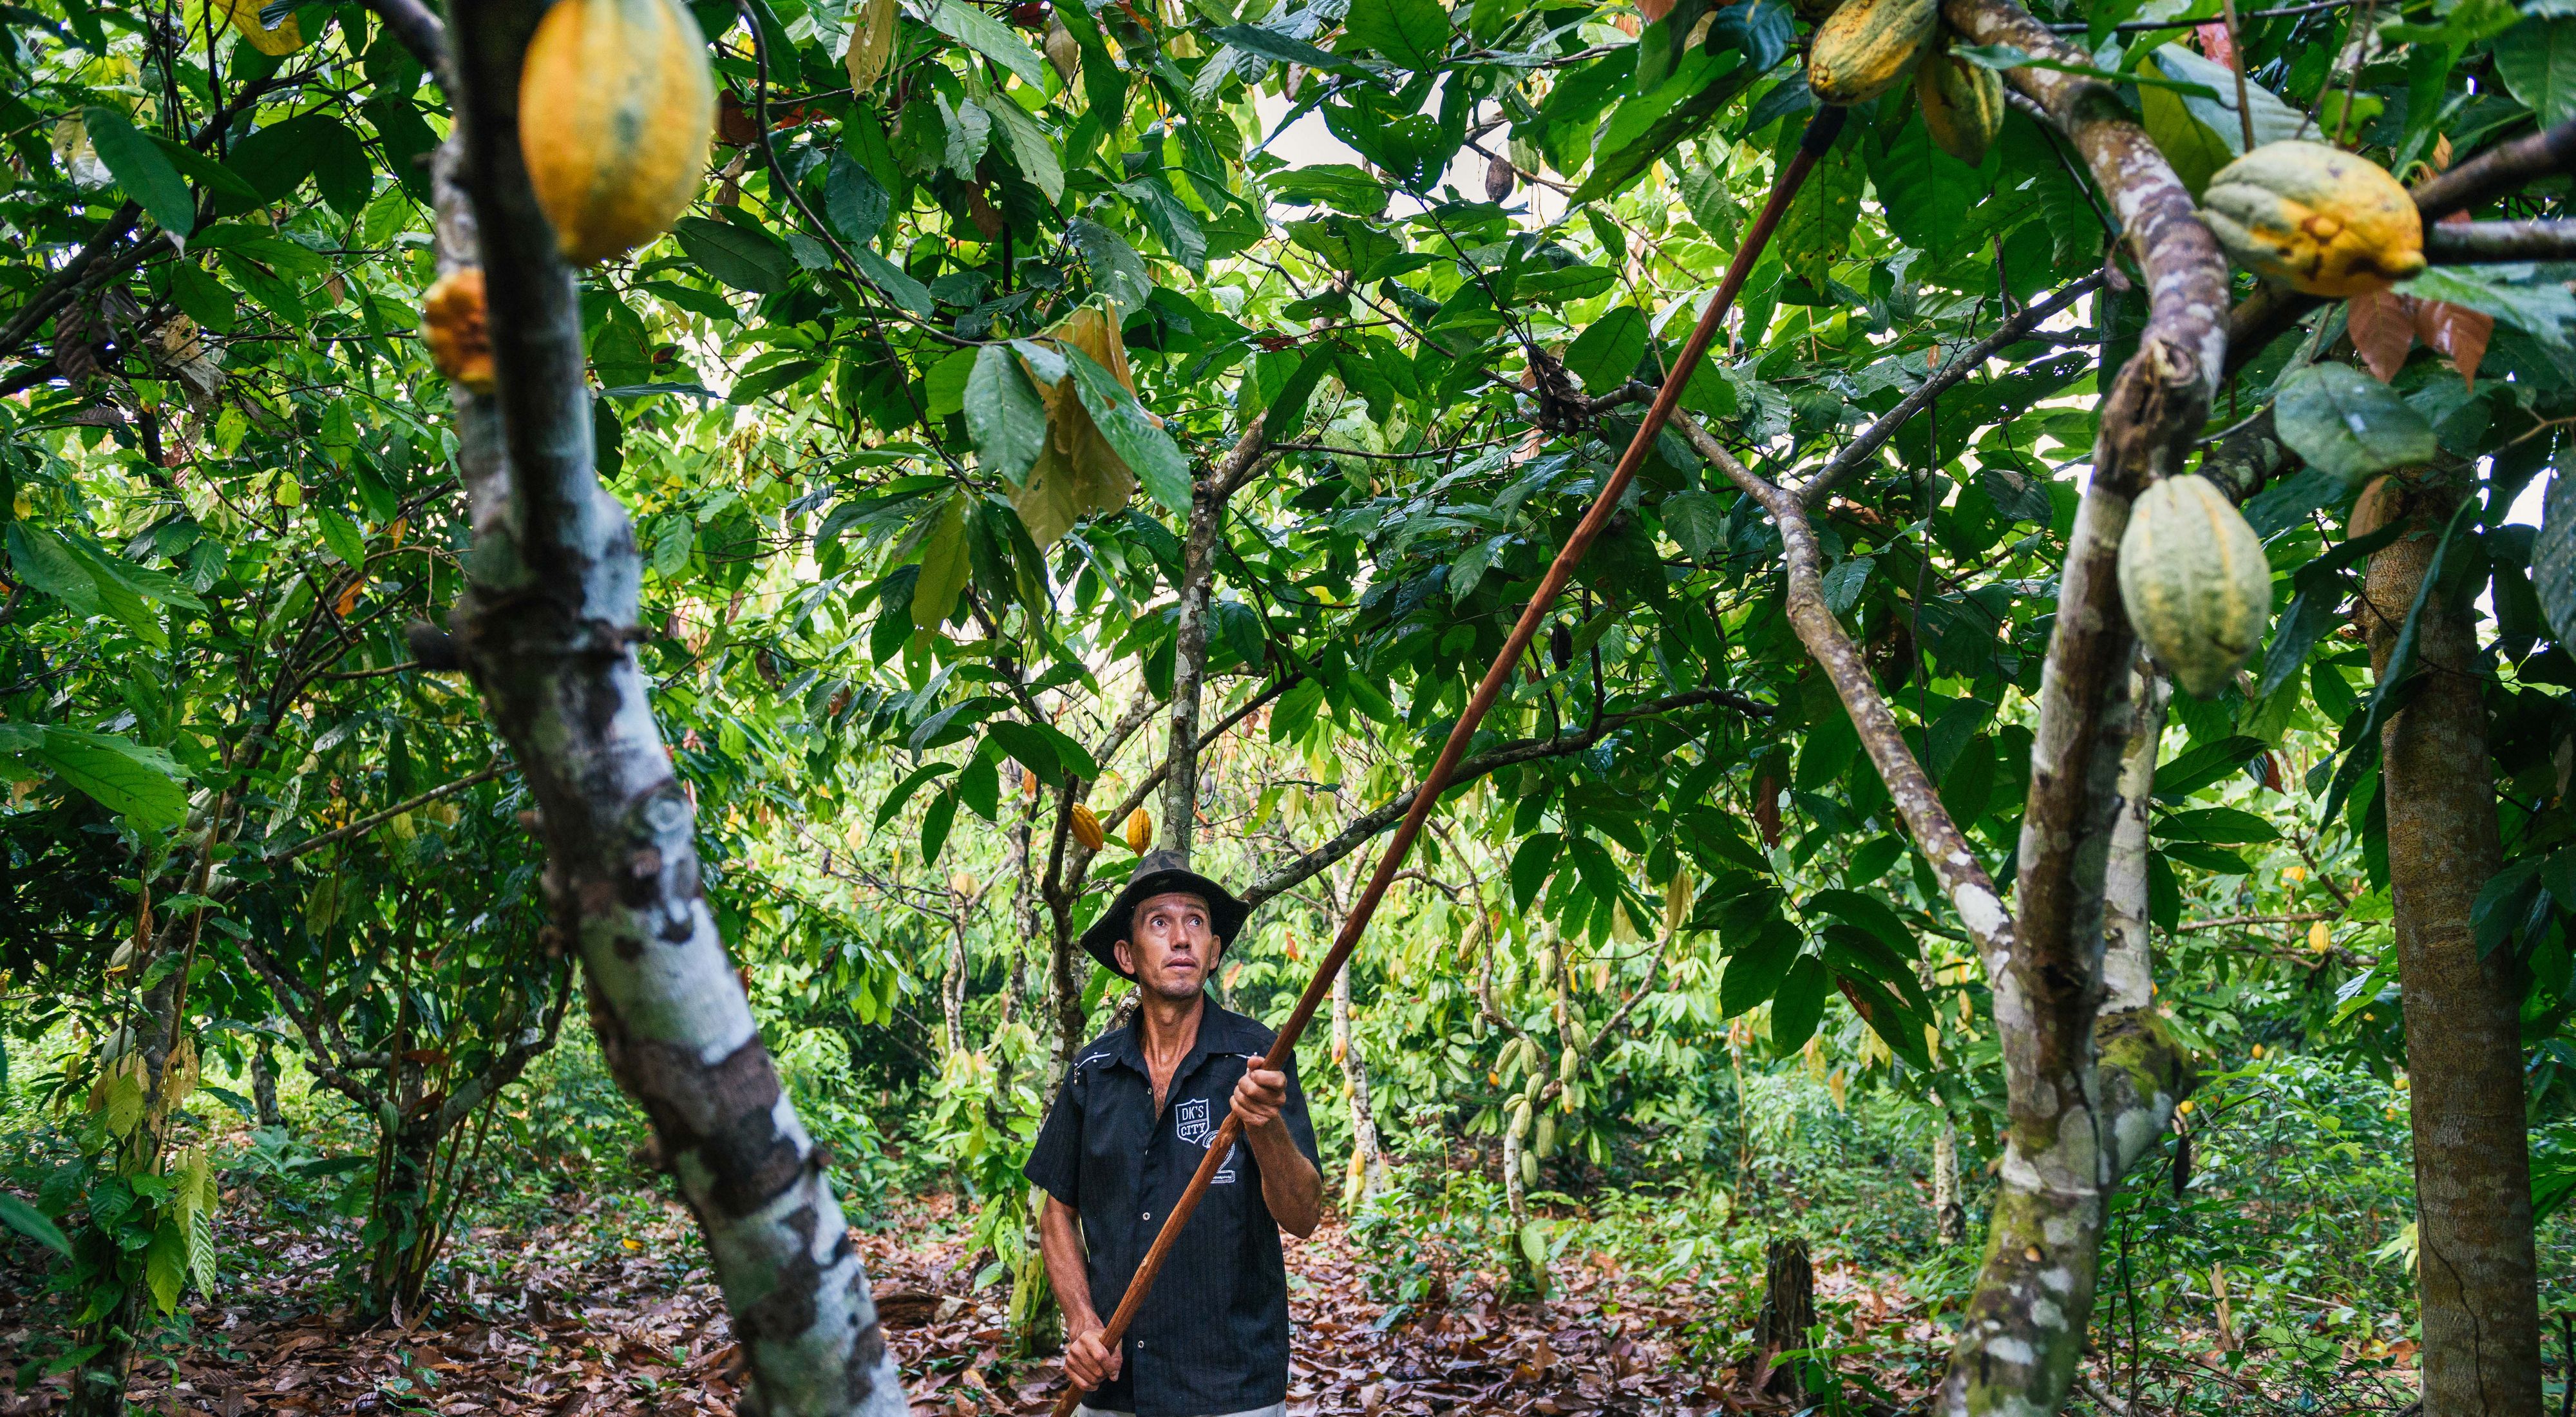 Man collecting cocoa in a tree.